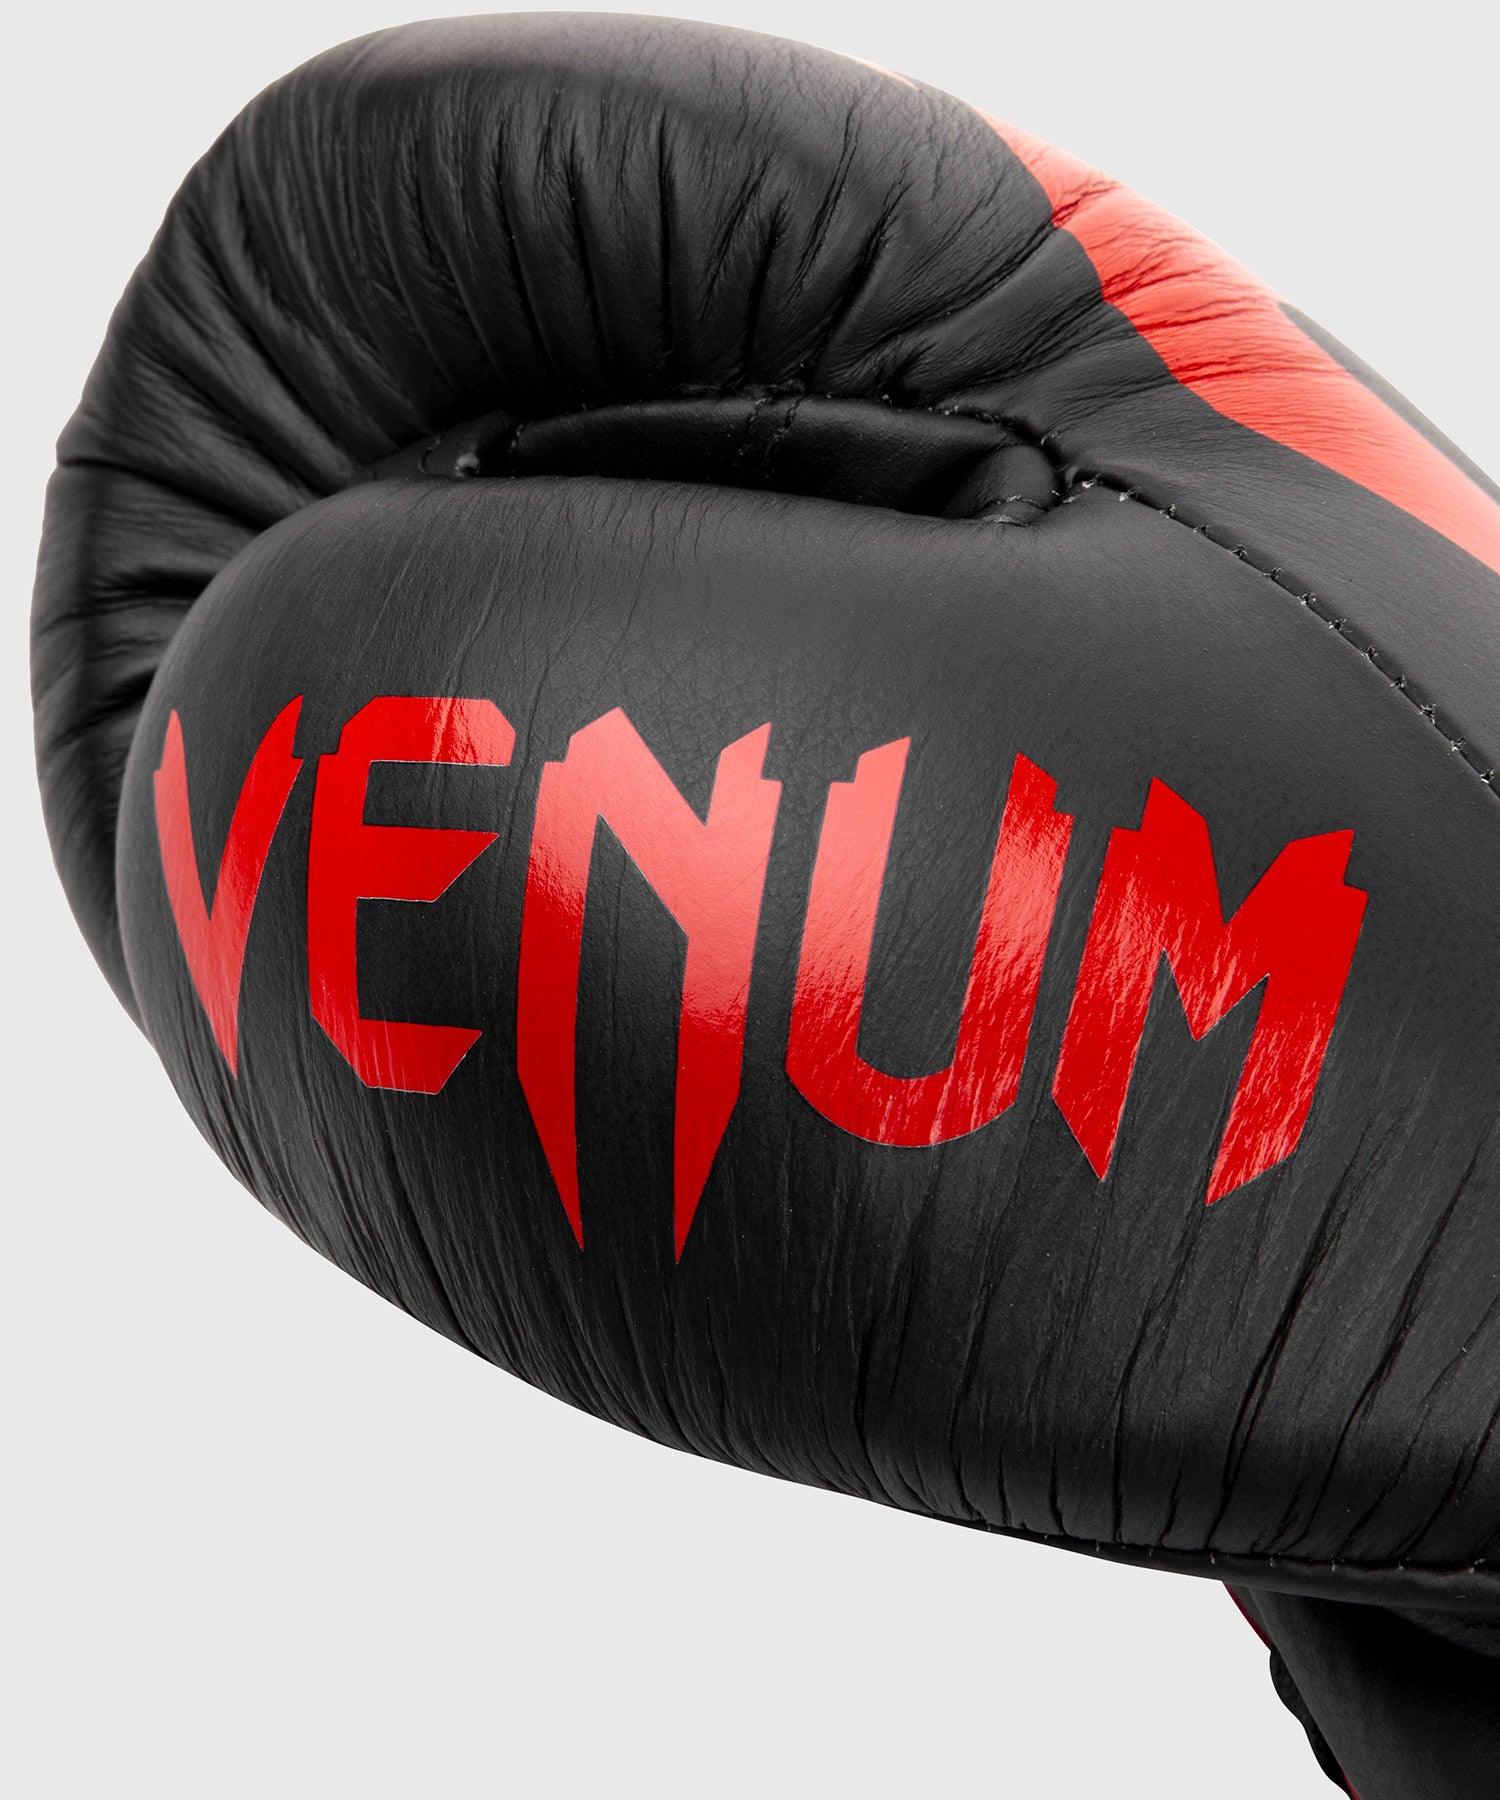 Venum Giant 2.0 Pro Boxing Gloves - With Laces - Black/Red Picture 8